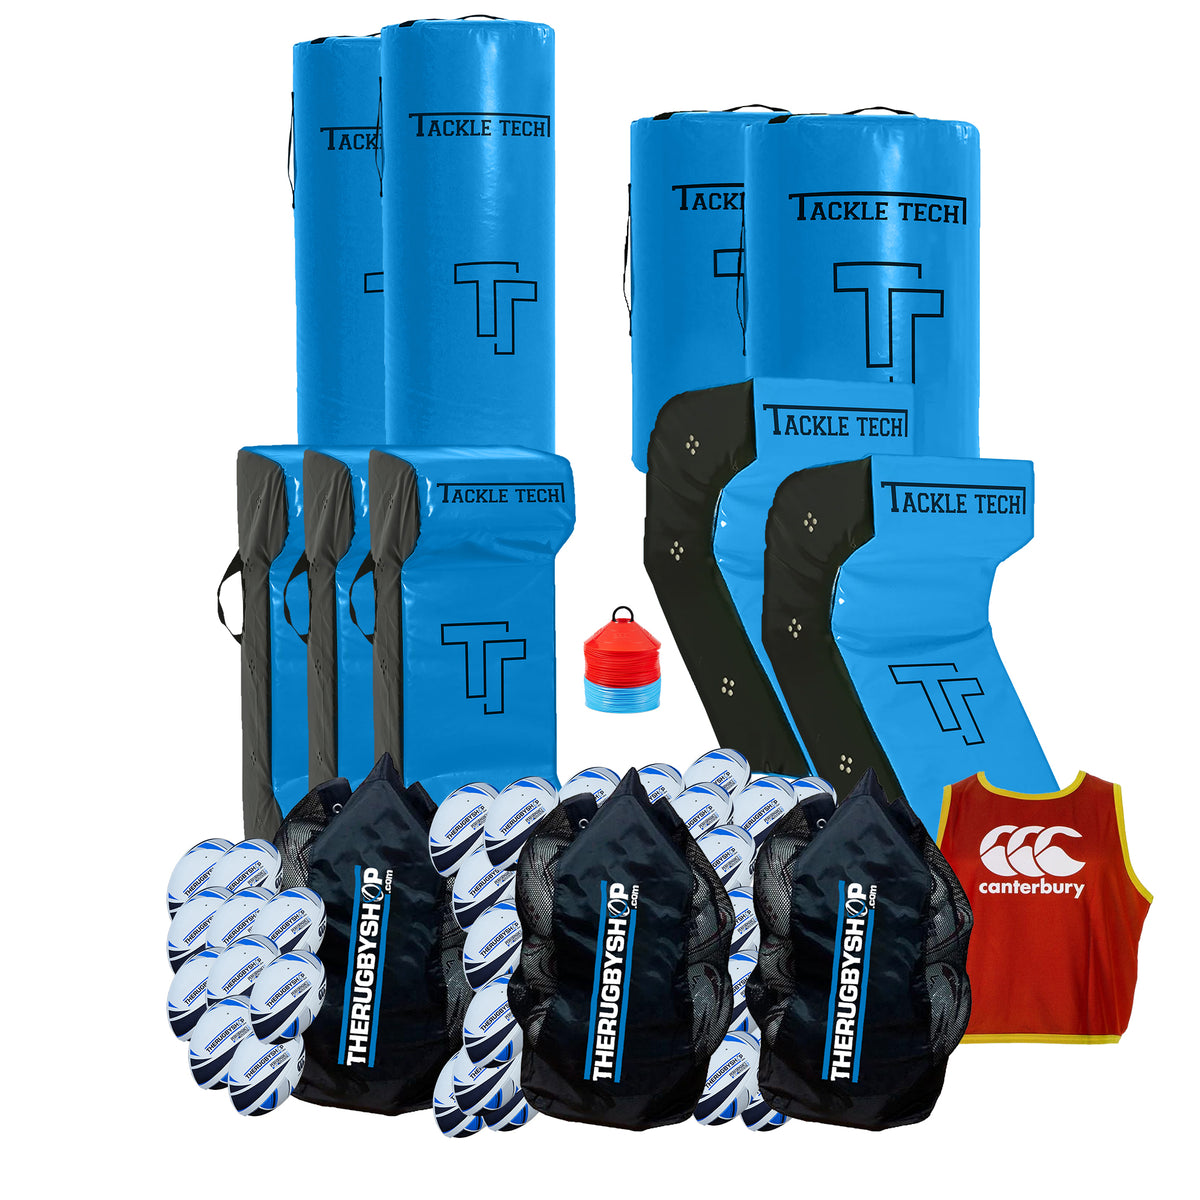 Ultimate Club Pack 3 x Senior Contact Shield  2 x Senior Tackle Bag 2 x Half Pint Tackle Bag 2 x Tackle Wedge 3 x Ball Bag 30 x Rugby Training Ball 50 x Reversible Pinnie 50 x Rugby Training Cones